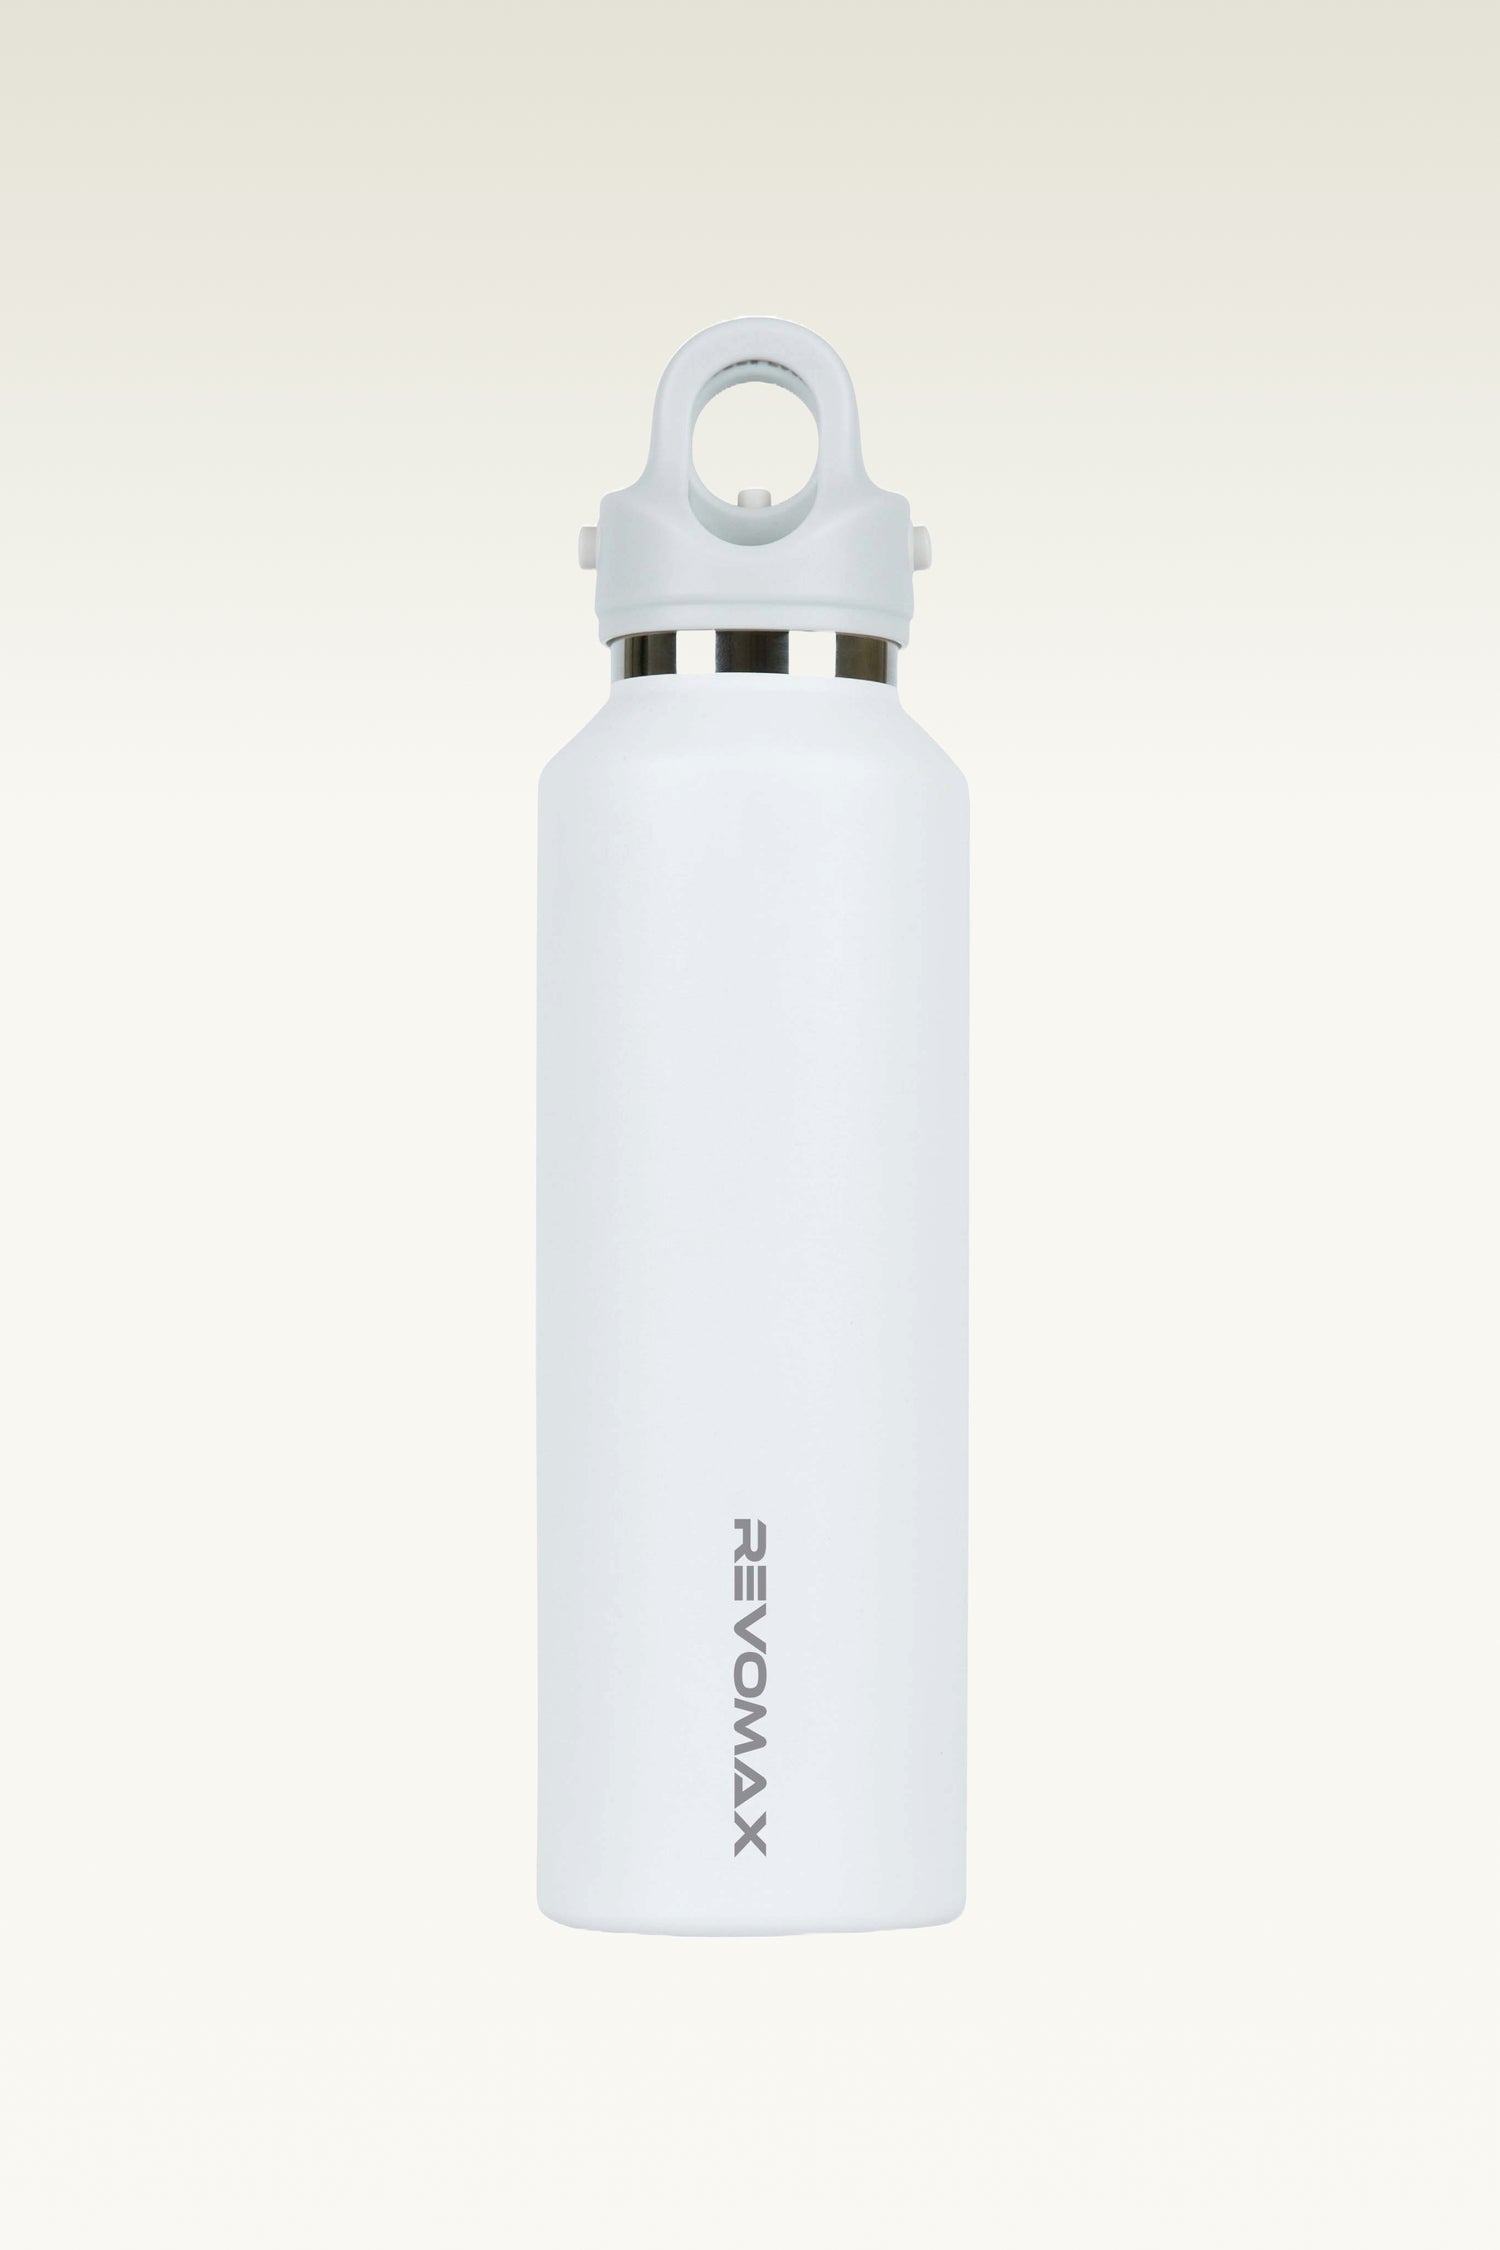 Hikesity's innovative, no-screw design 20oz water bottle; Open and close with one hand within 2 seconds. Easy to clean!